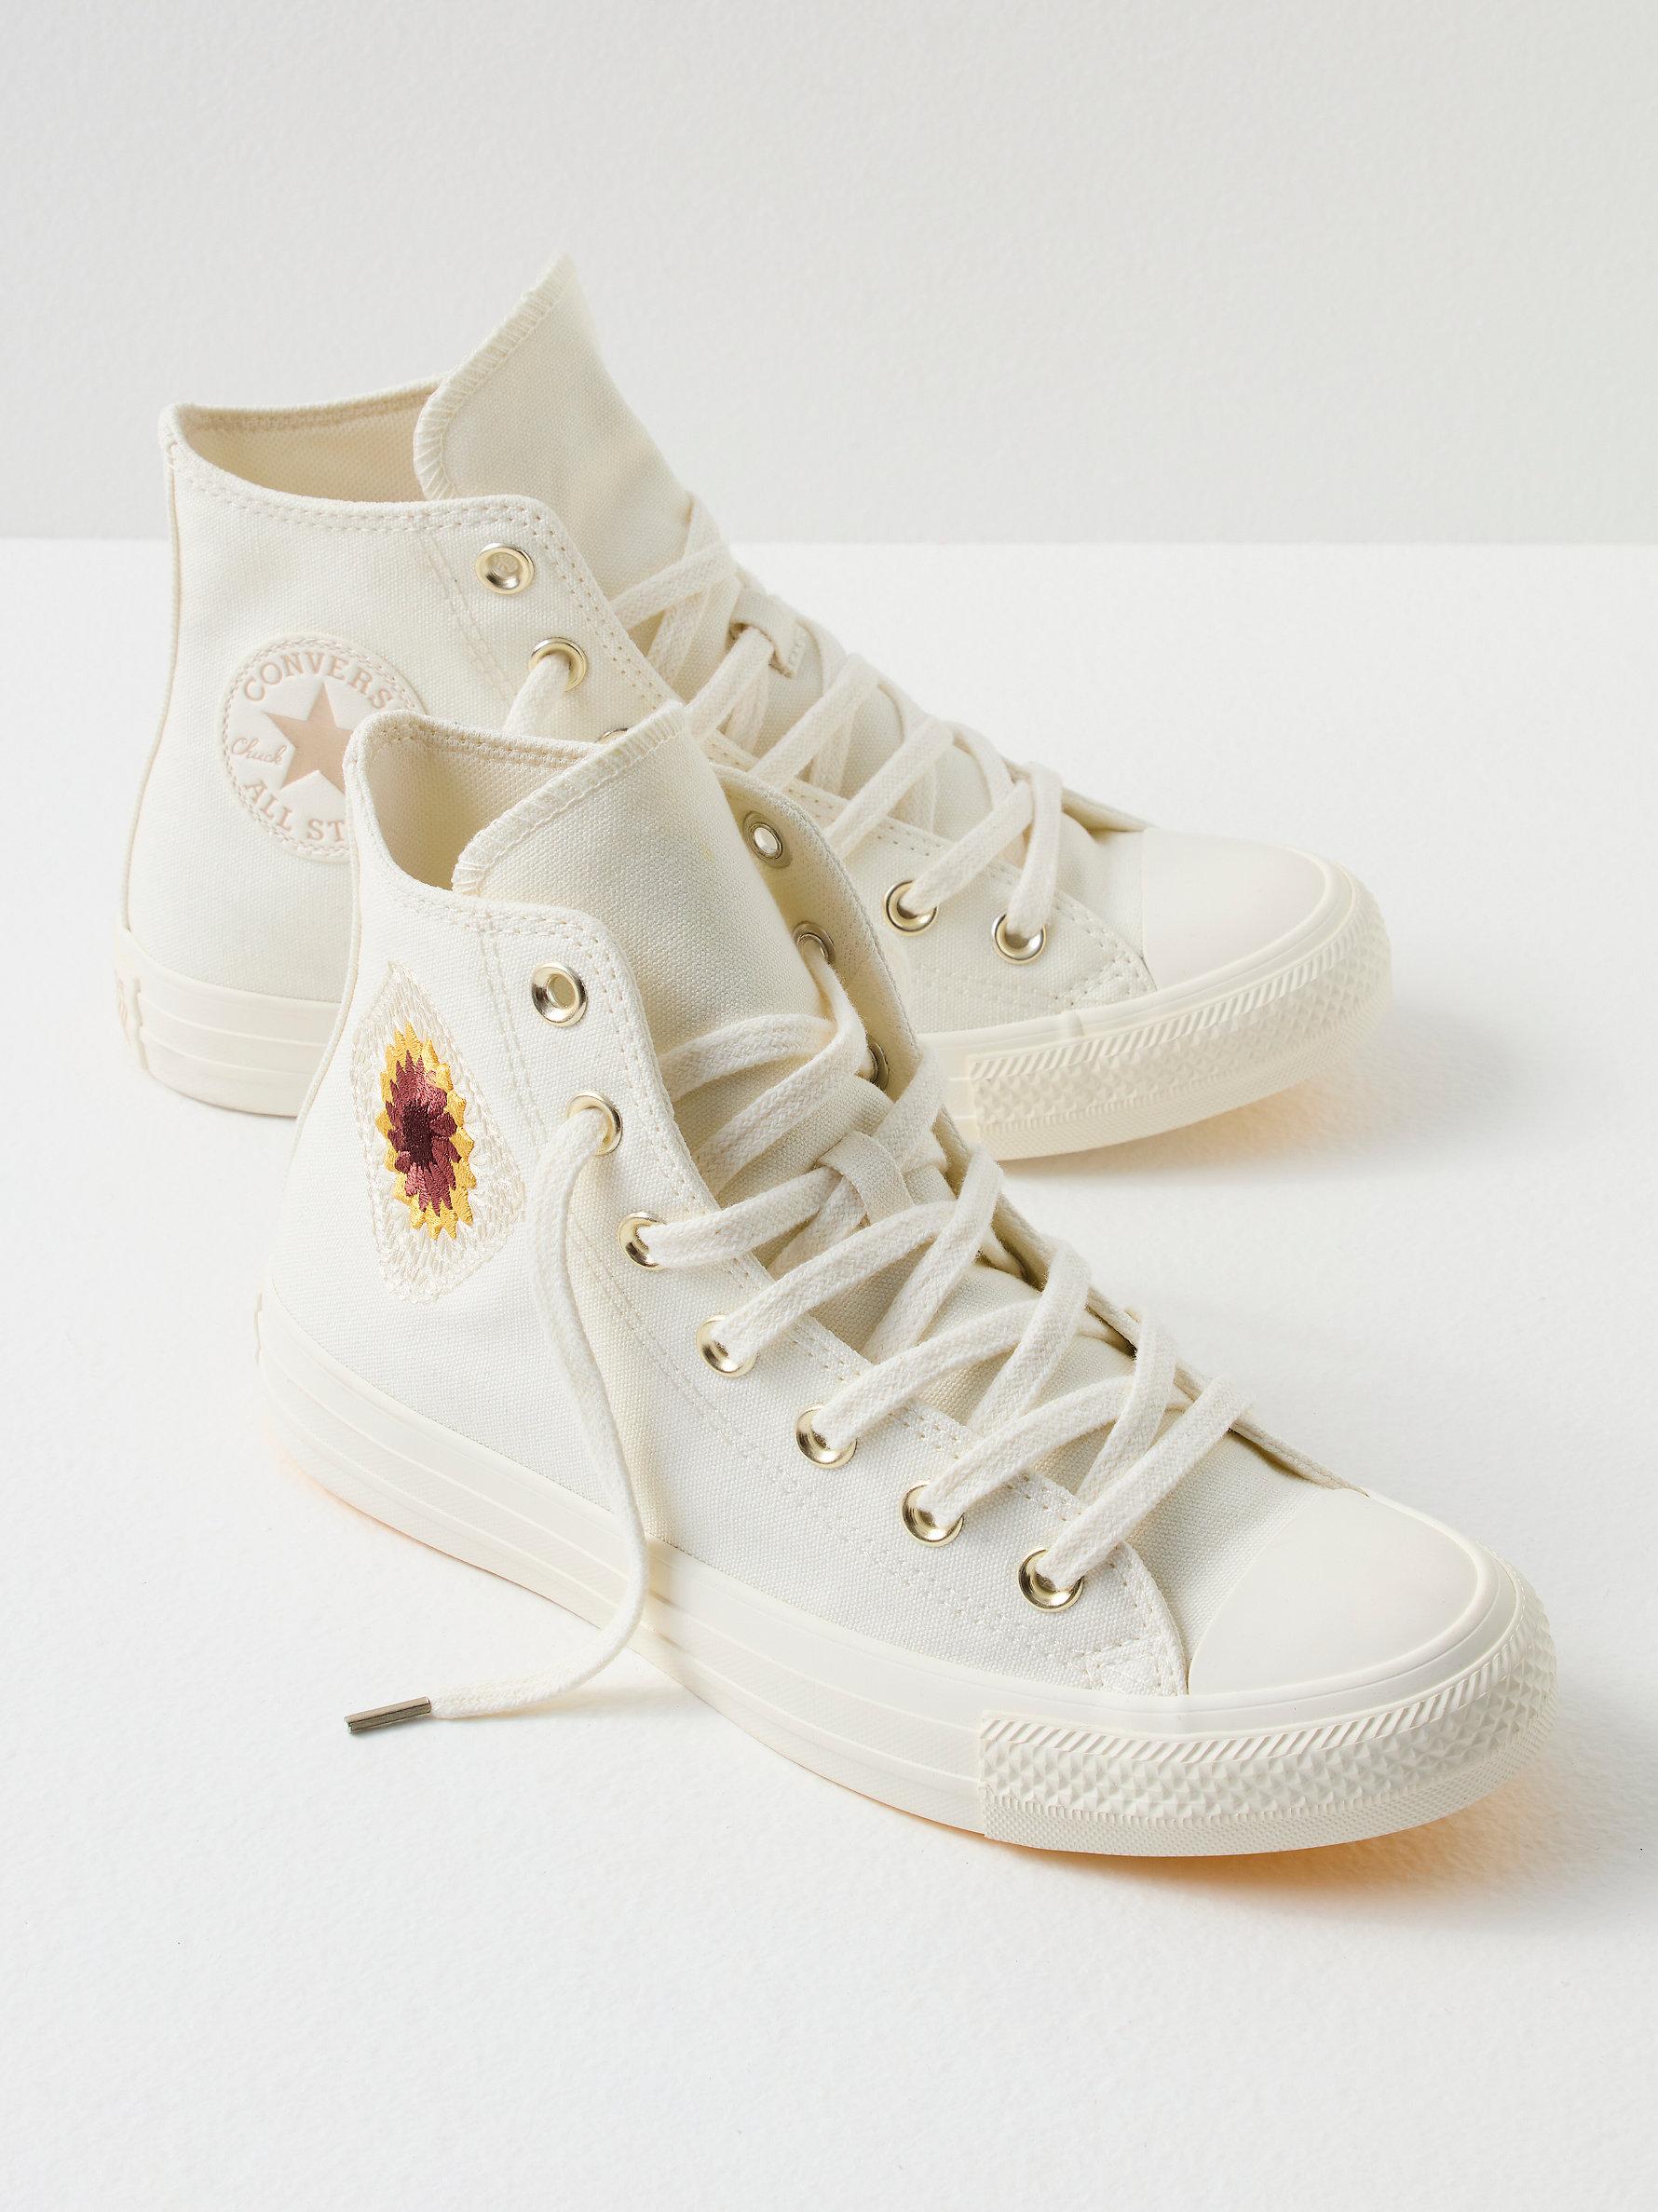 Free People Chuck Taylor All Star Sunflower Hi Top Sneakers in White | Lyst